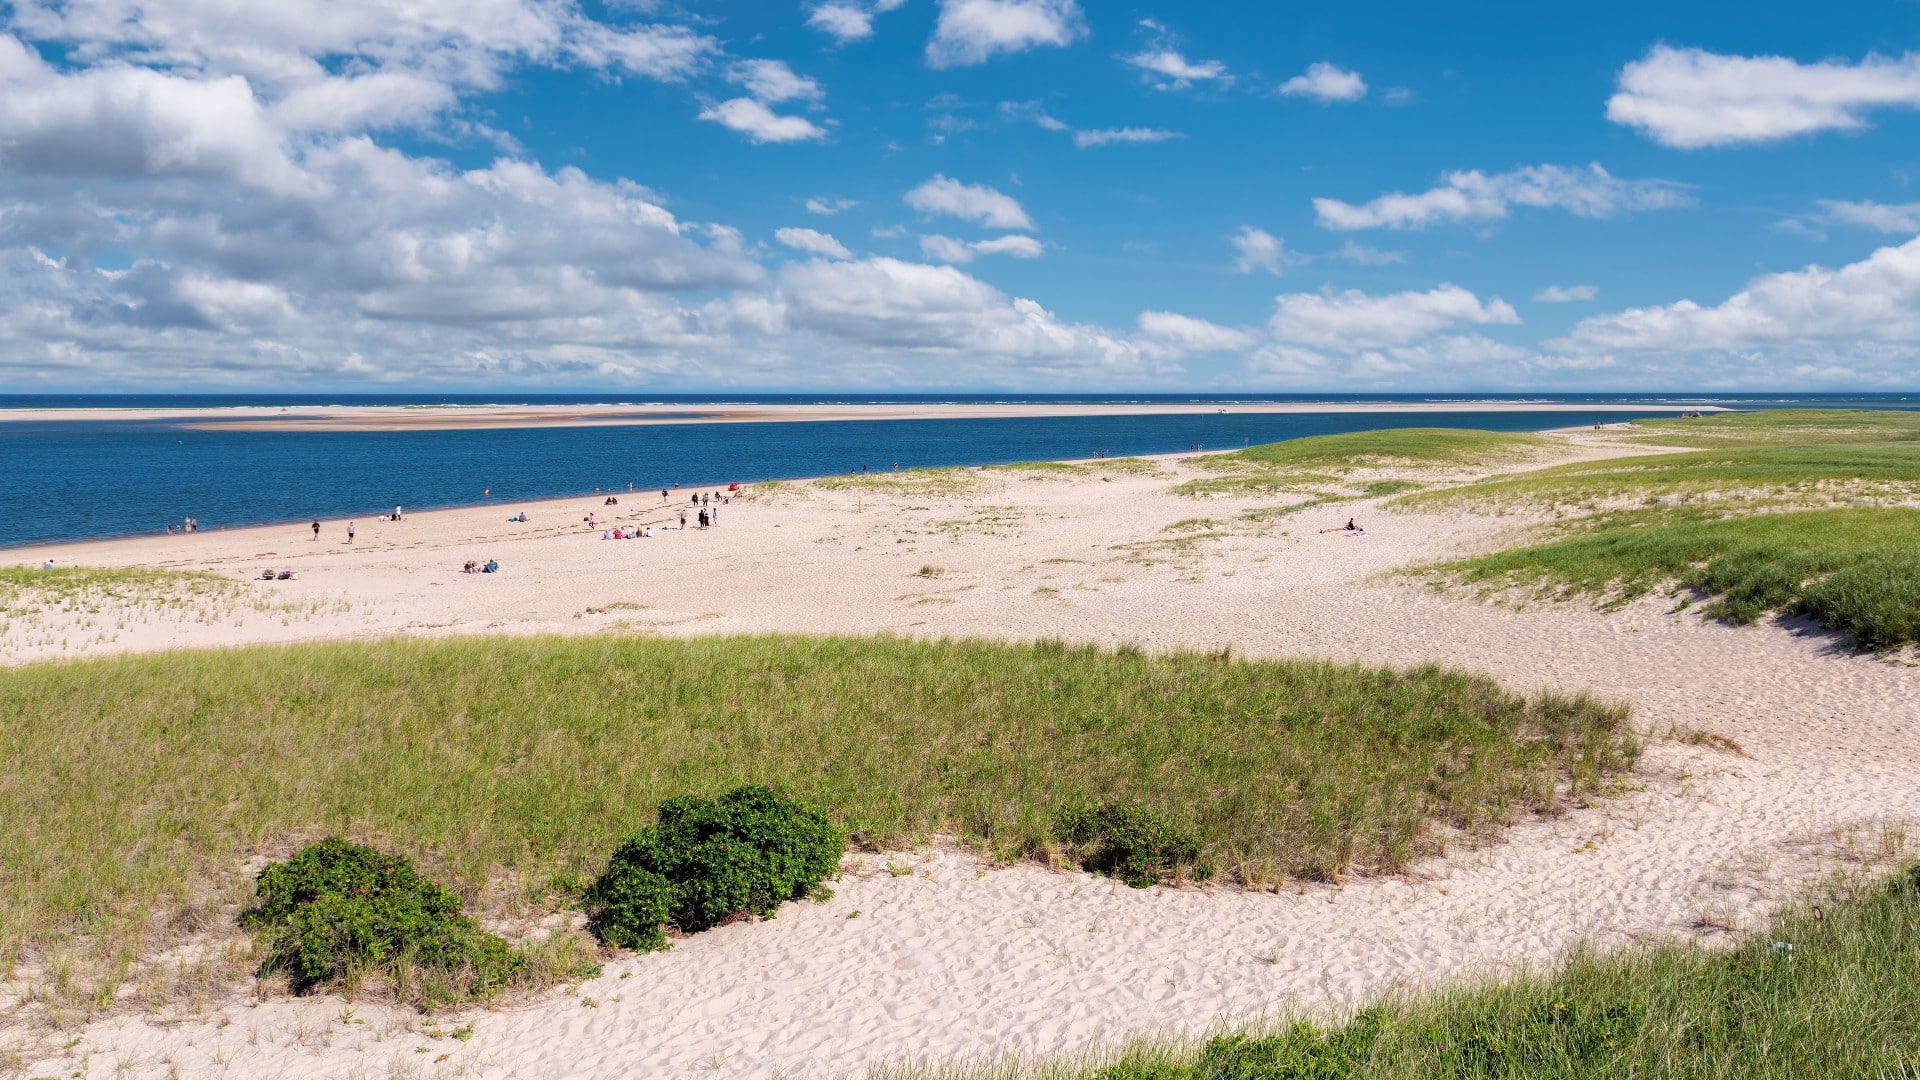 Wide and long sandy beach with grass dunes and blue skies